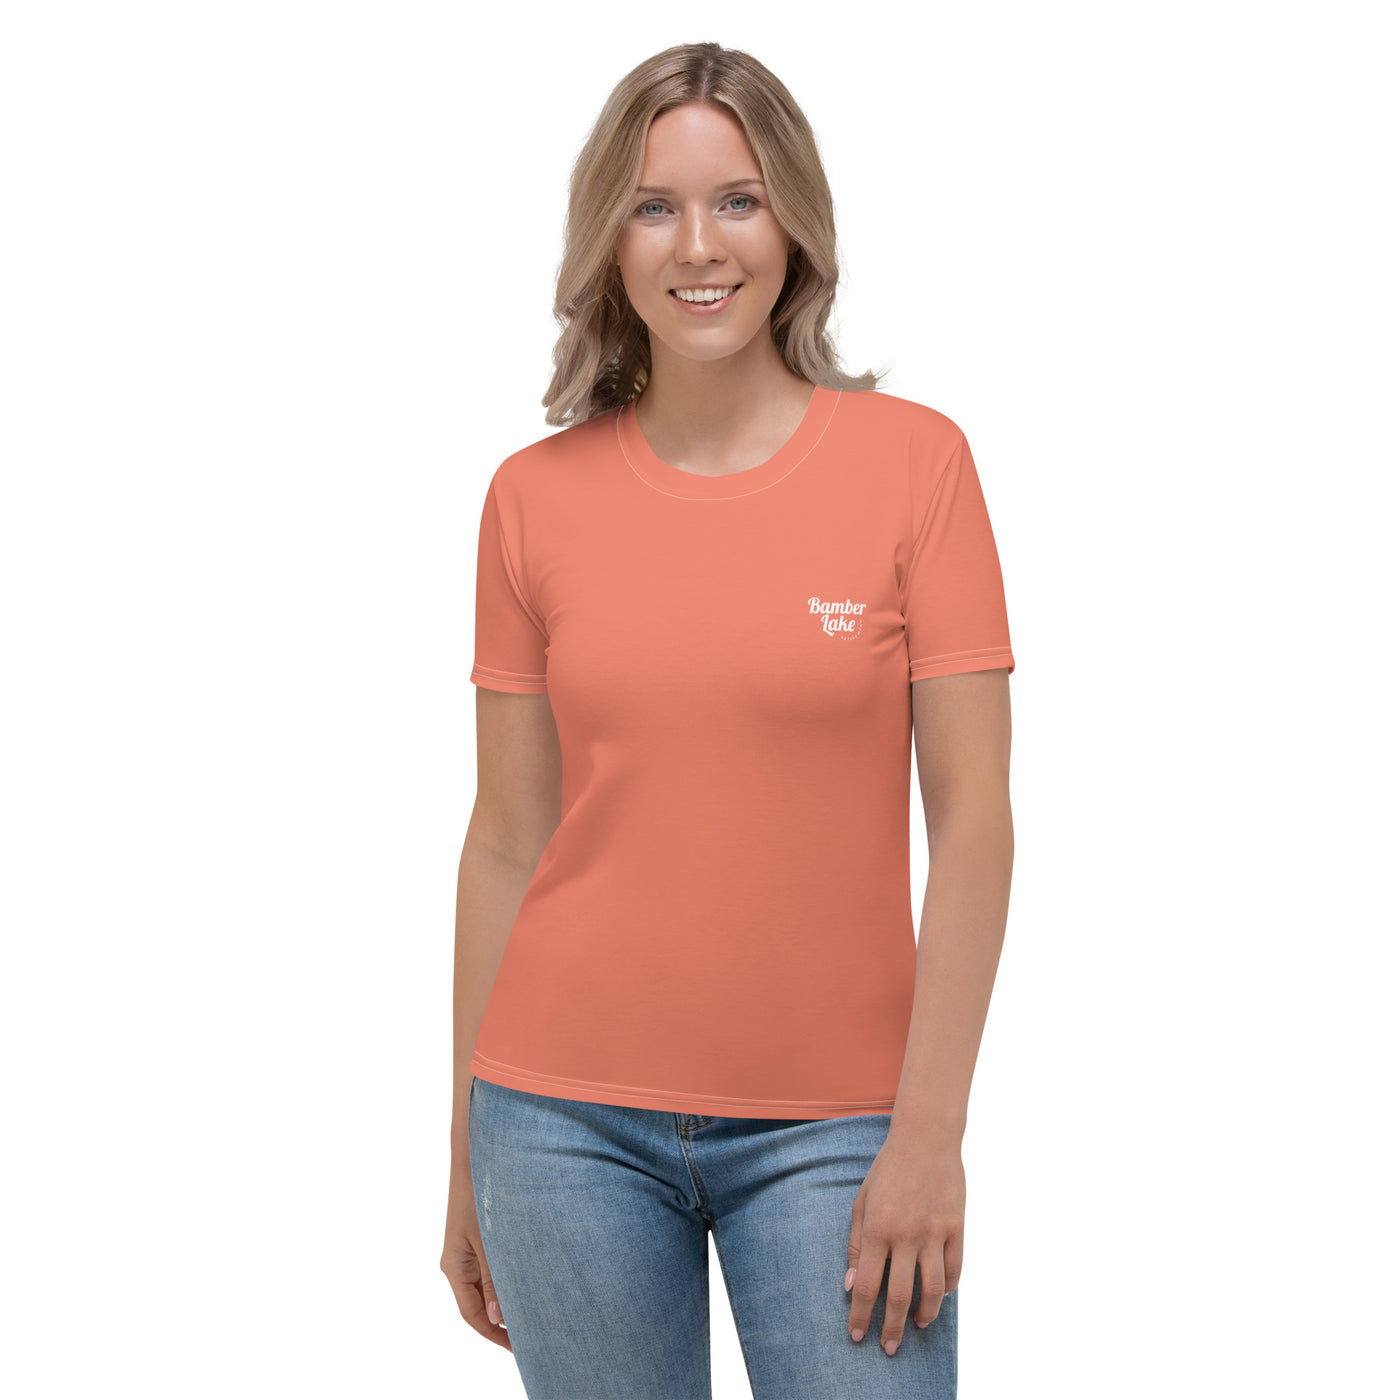 Perfectly Peach Tee: Ultimate Combination of Style & Comfort